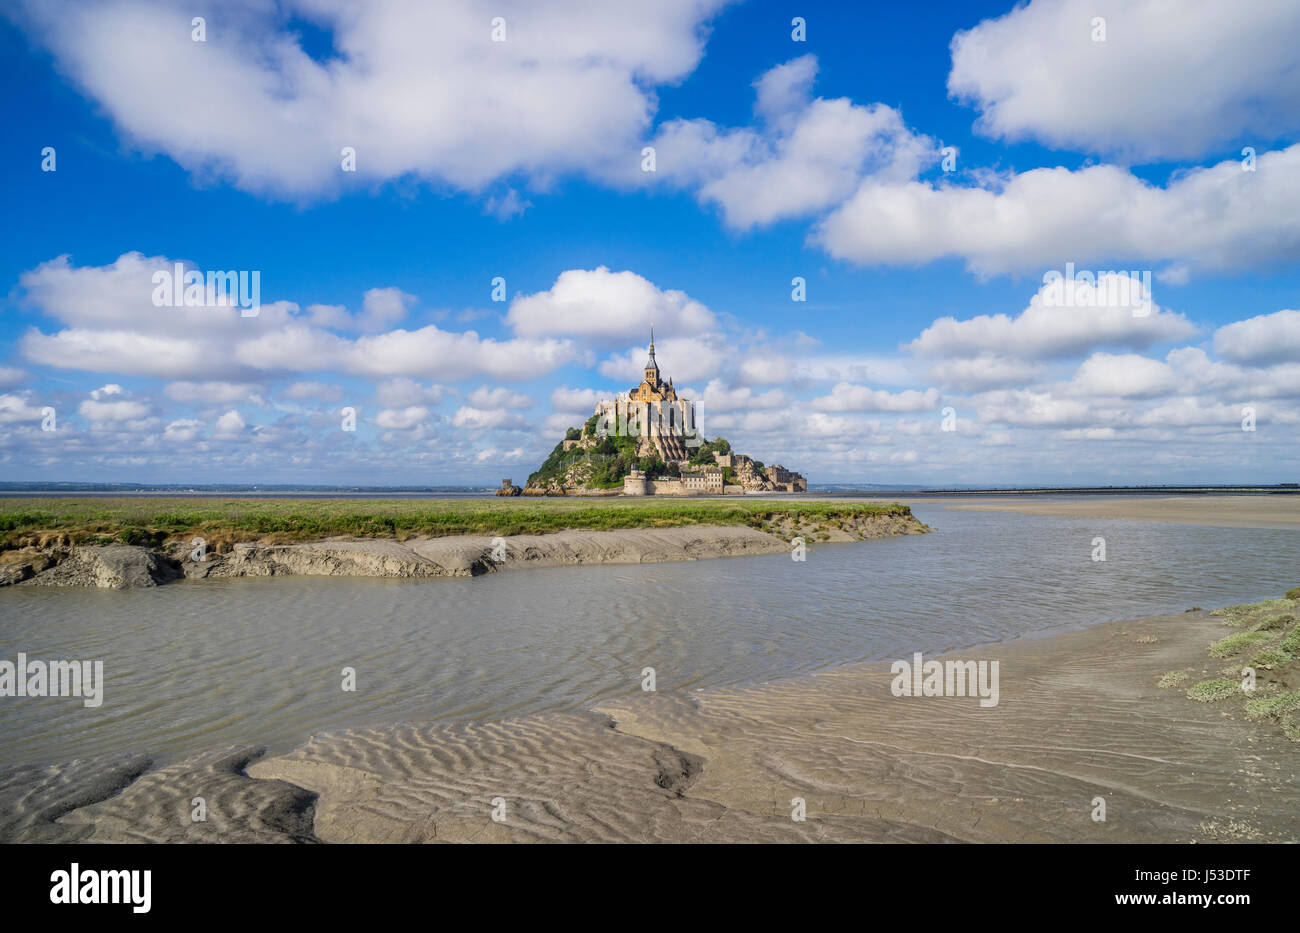 France, Normandy, view of Mont Saint-Michel in the estuary of Couesnon River Stock Photo